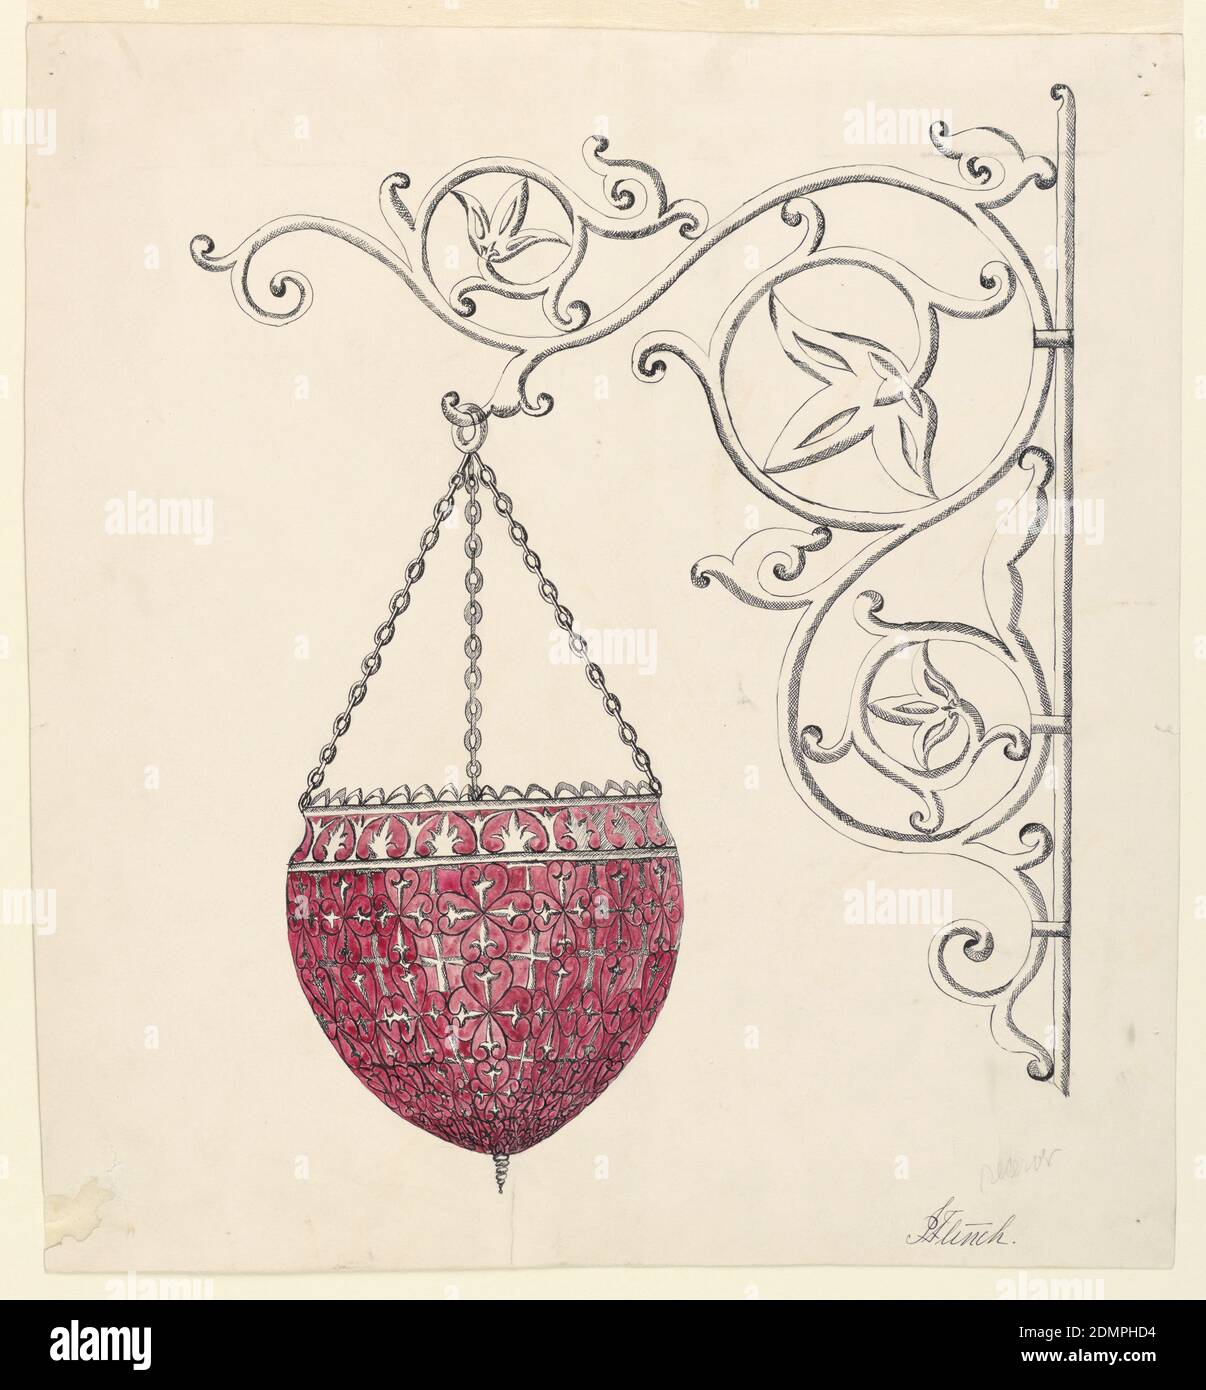 Design for a Wrought Iron Light Fixture, J. Flinch, Pen and ink, watercolor on Bristol board, Vertical rectangle. A hanging fixture, suspended from a wall-bracket., USA, ca. 1894, appliances & tools, Drawing Stock Photo